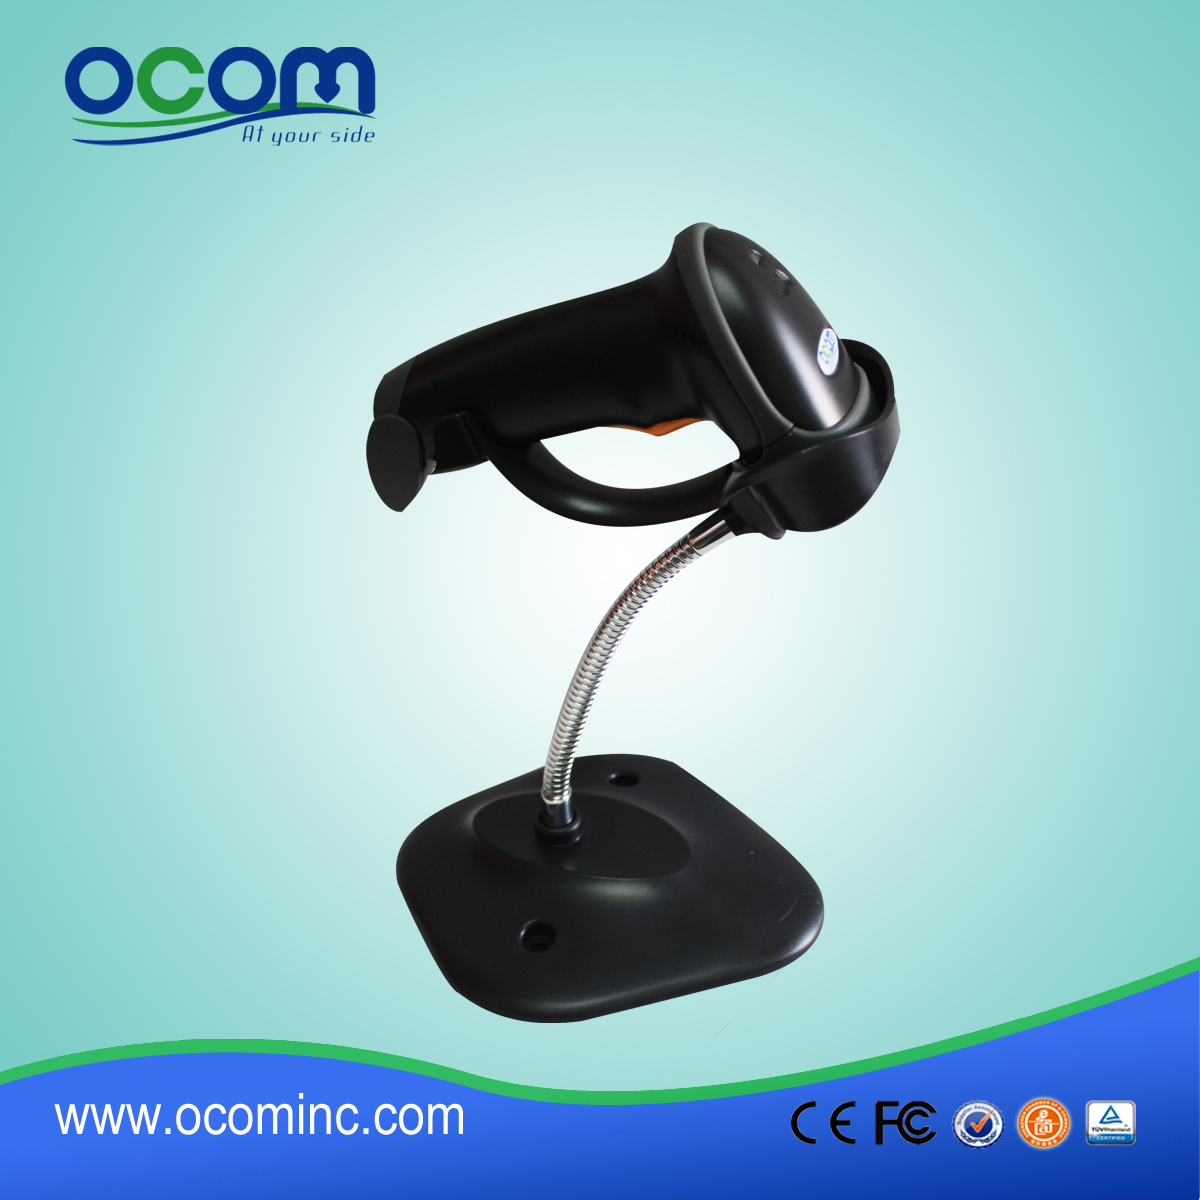 OCBS-LA12 Merchandise barcodes Wired Selfservice scanner with Stand